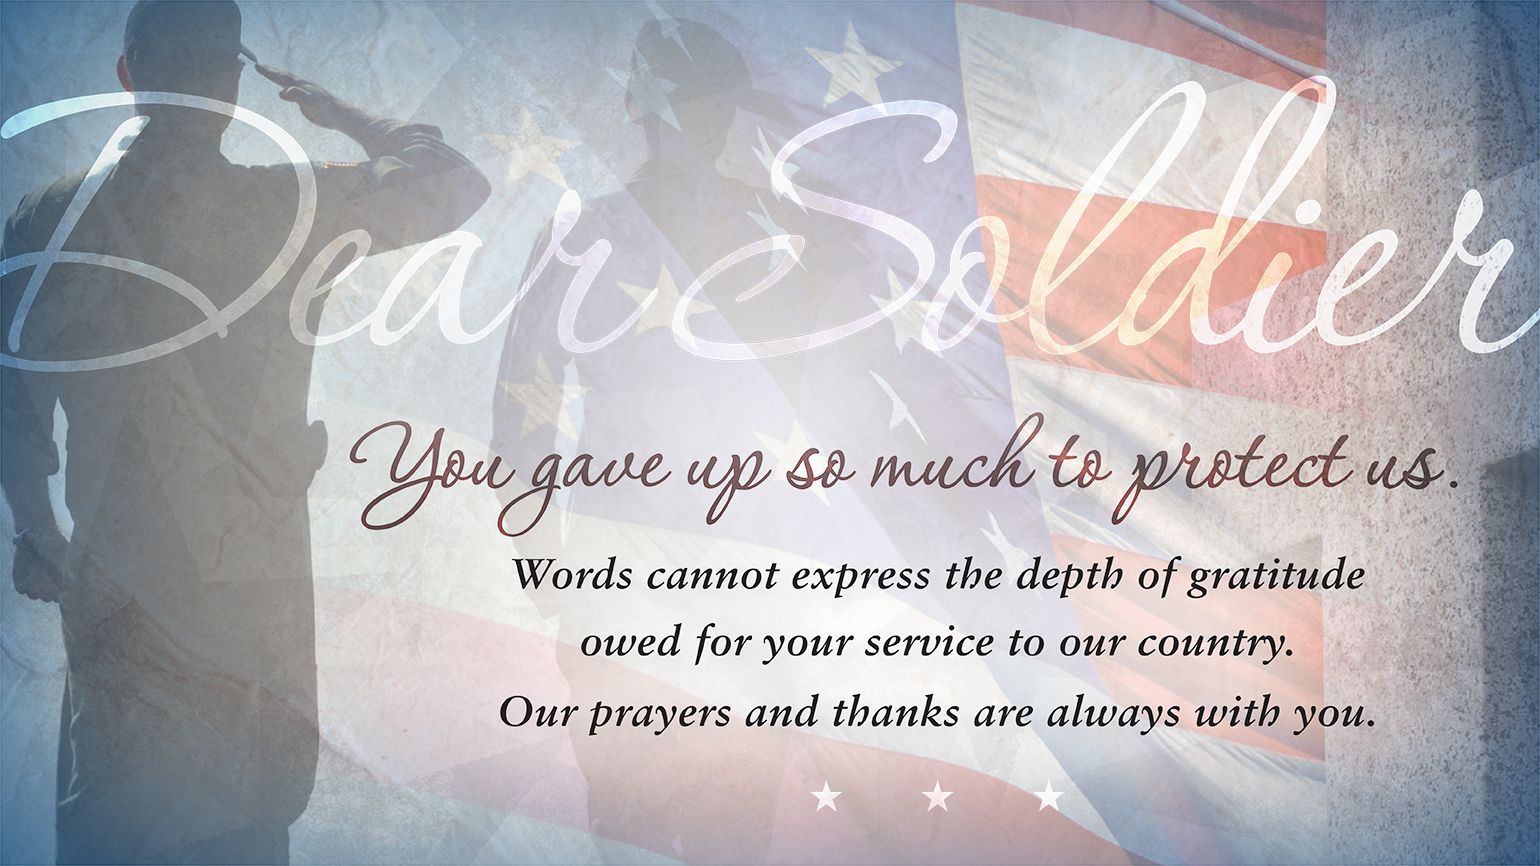 An expression of thanks to our active-duty military and veterans, with a soldier saluting in the background